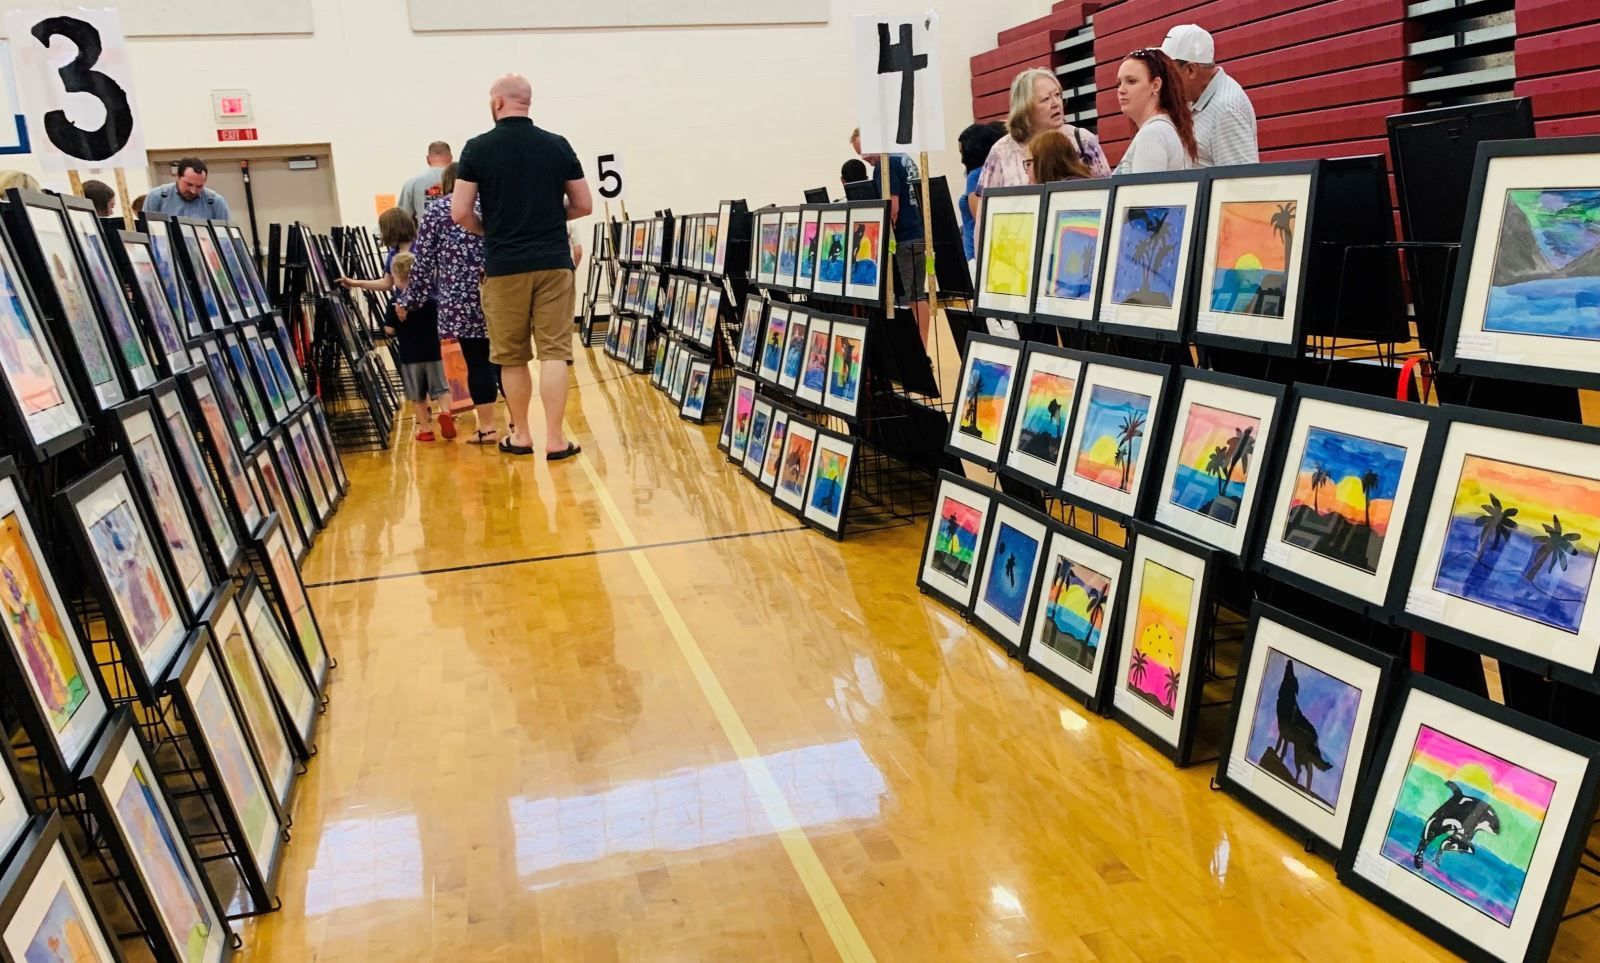 a group of people are looking at paintings on display in a gym .